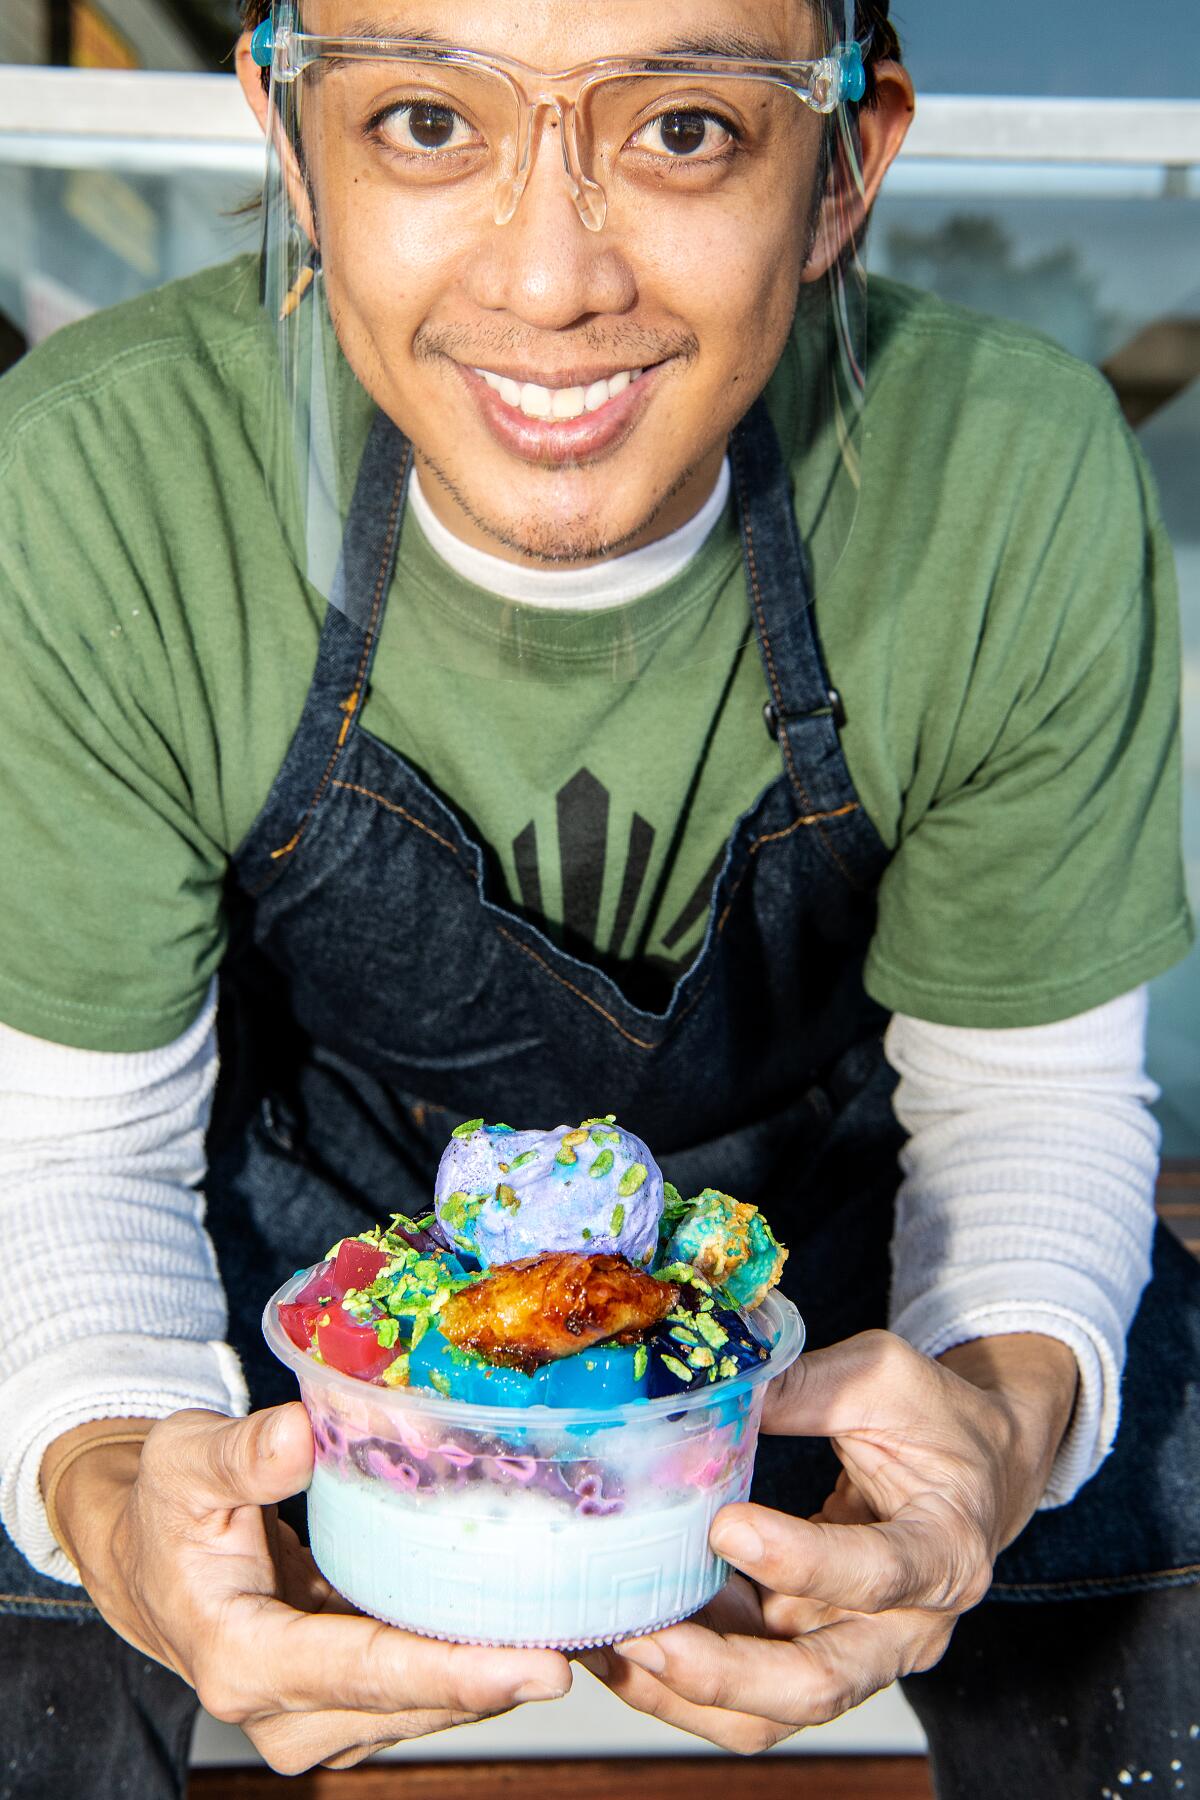 Christian Esteban holds the halo halo from his family's store, Chaaste Family Market in Pasadena.